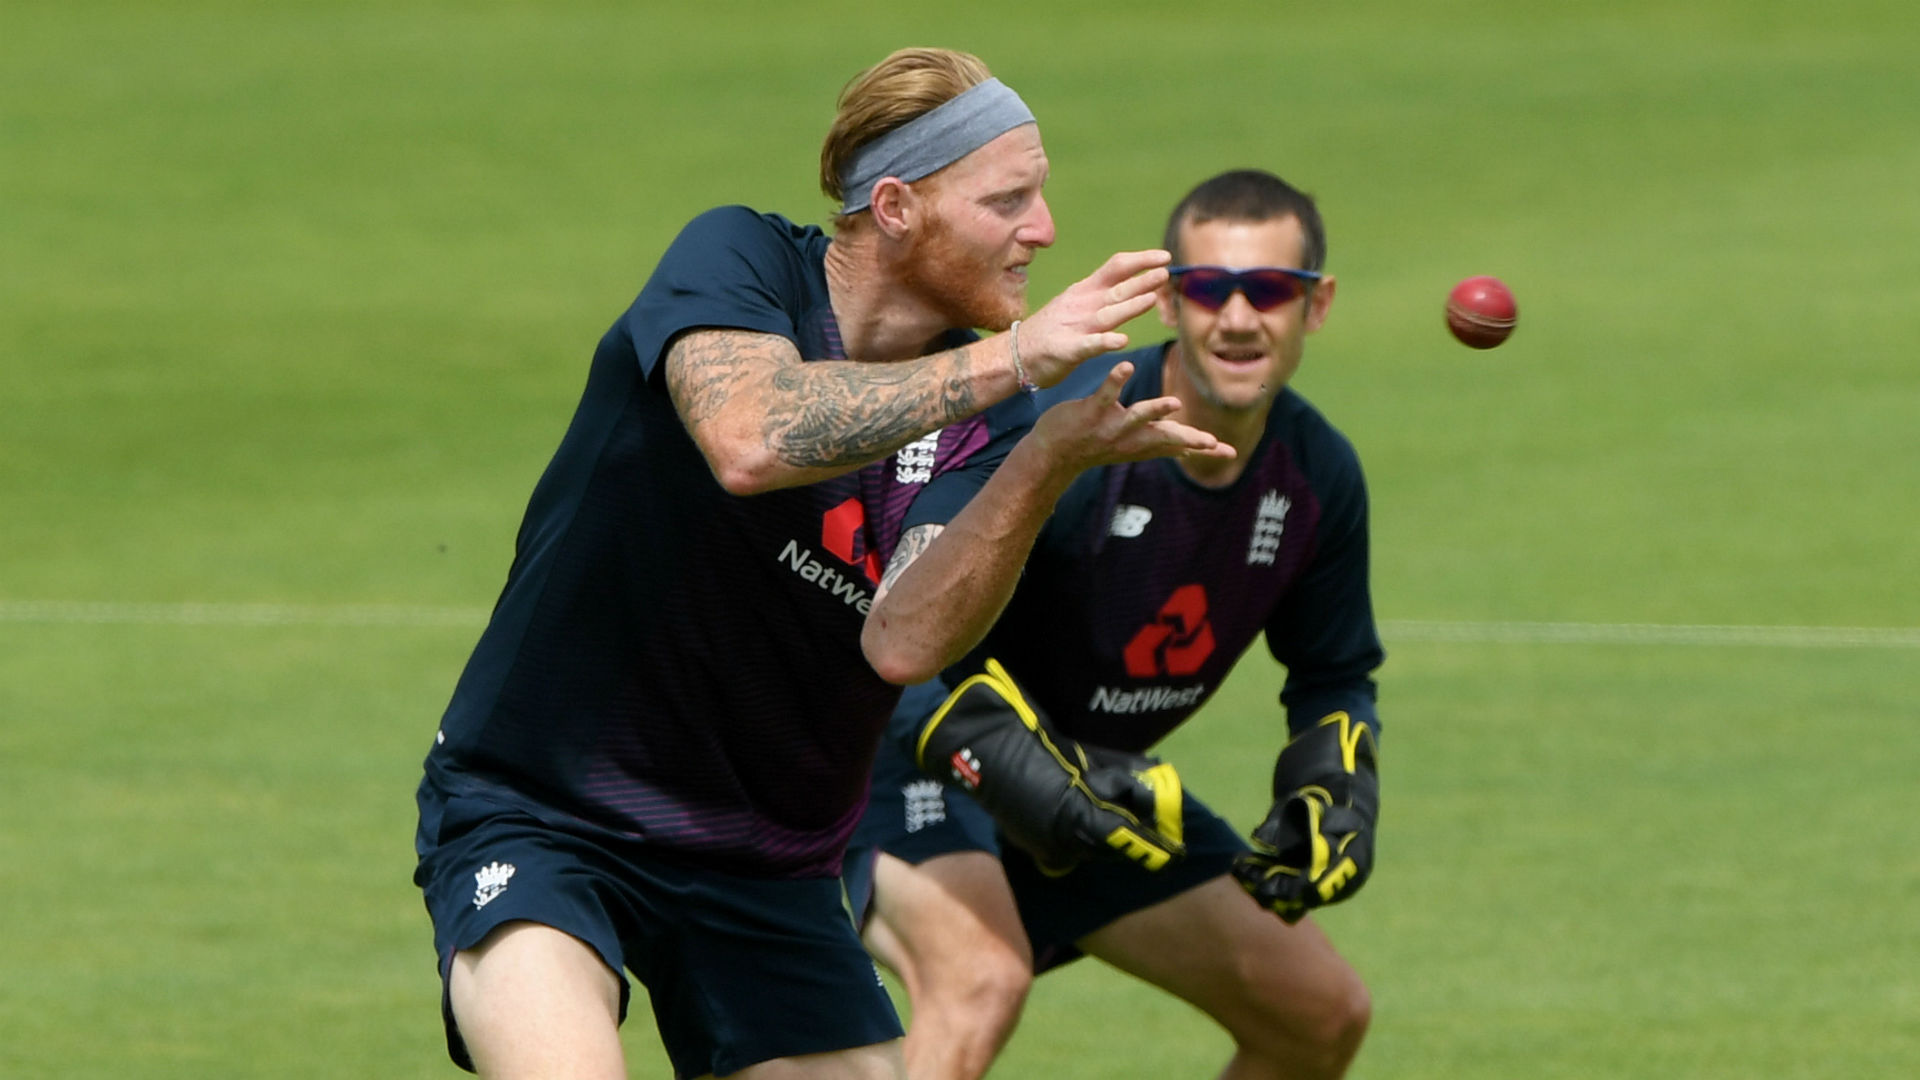 Ben Stokes conceded he would be "stupid" not to take advice from his team-mates when he leads England for the first time.